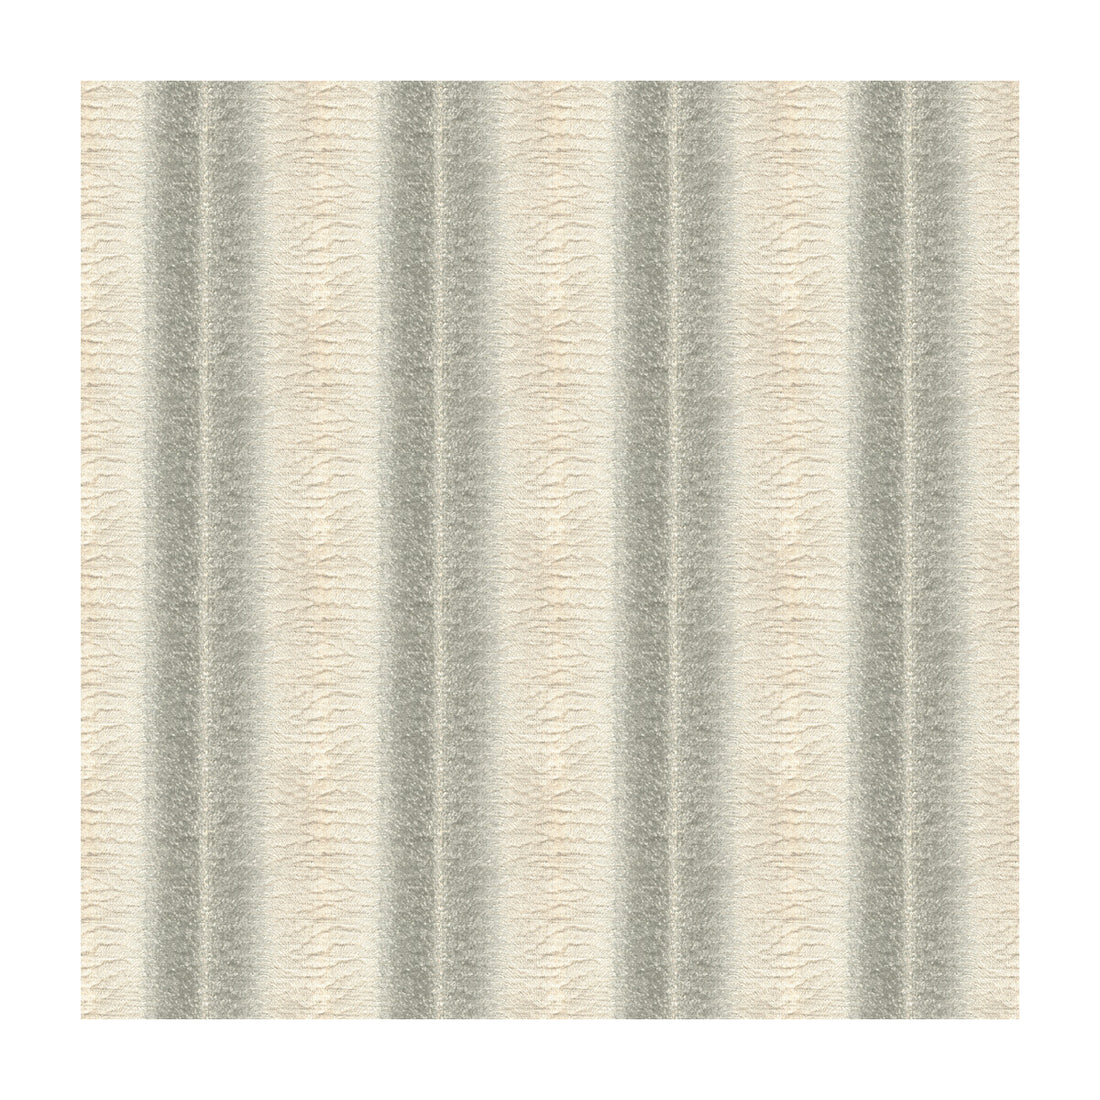 Modern Elegance I fabric in glacier color - pattern 29604.11.0 - by Kravet Couture in the Modern Luxe collection